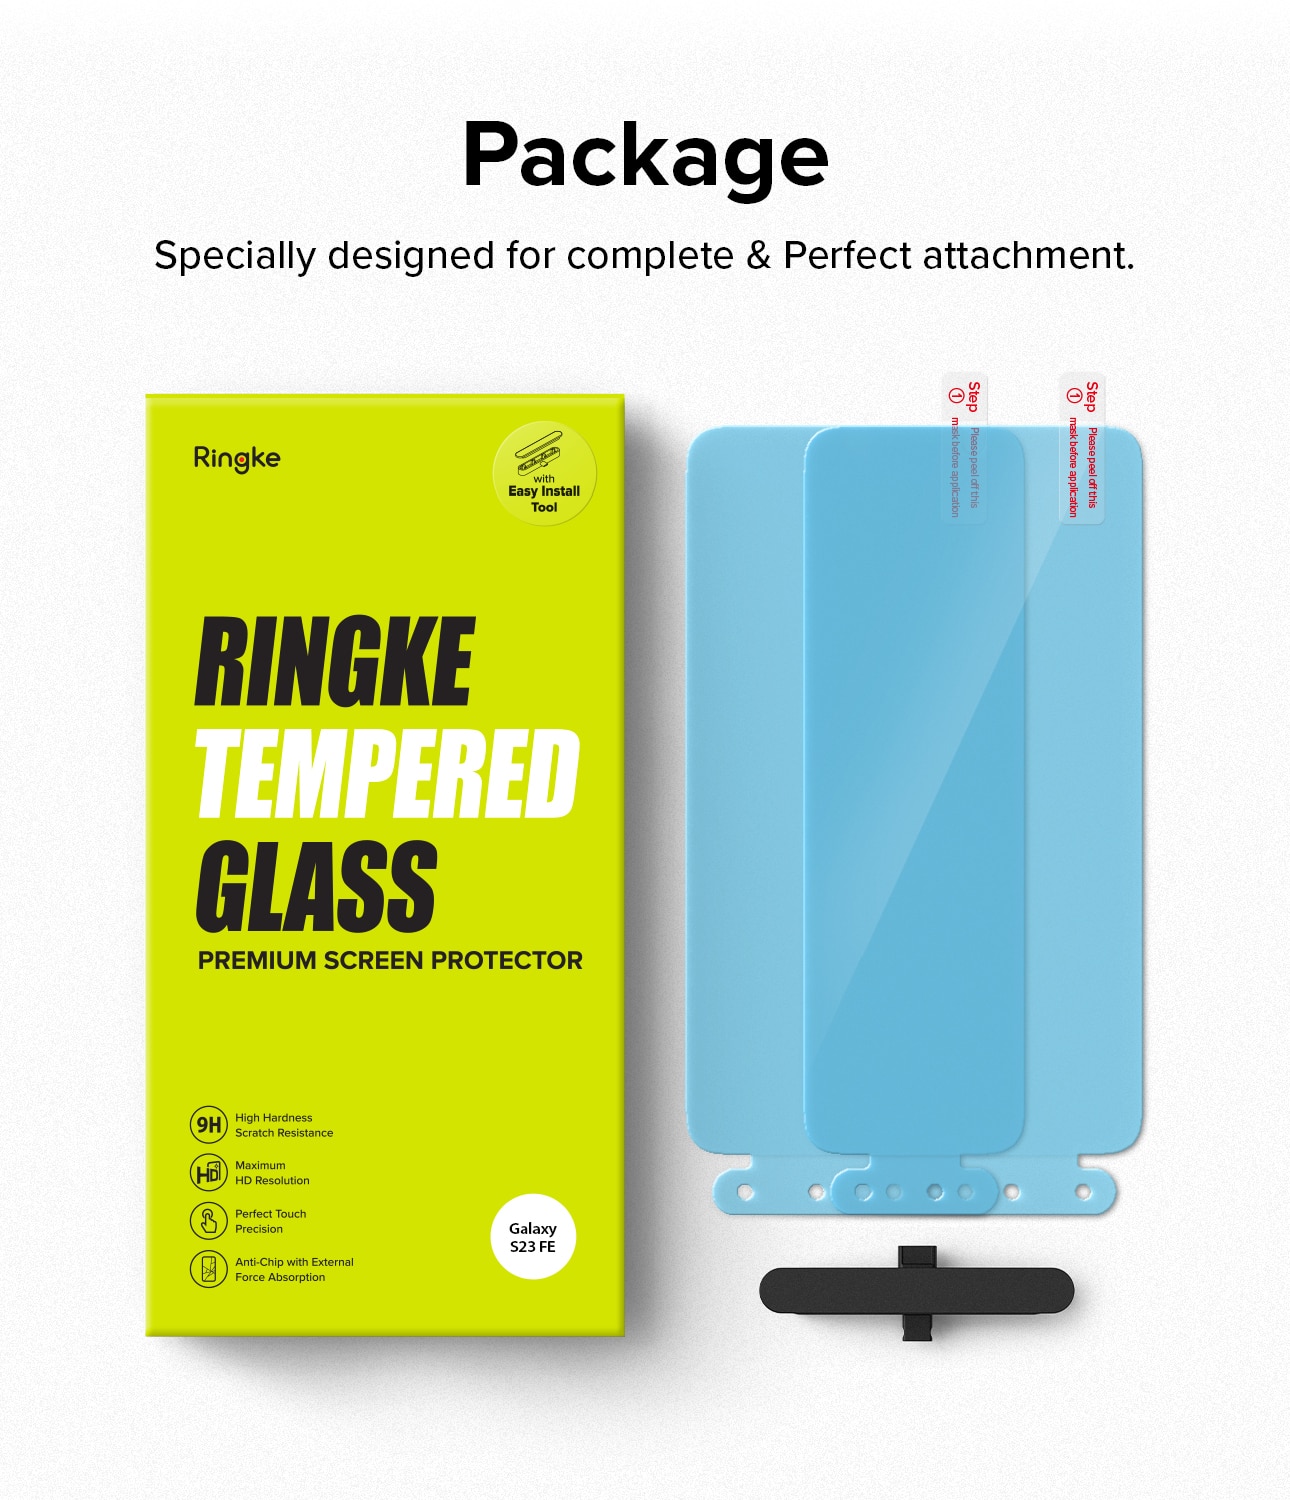 Samsung Galaxy S23 FE Screen Protector Glass (2-pack)